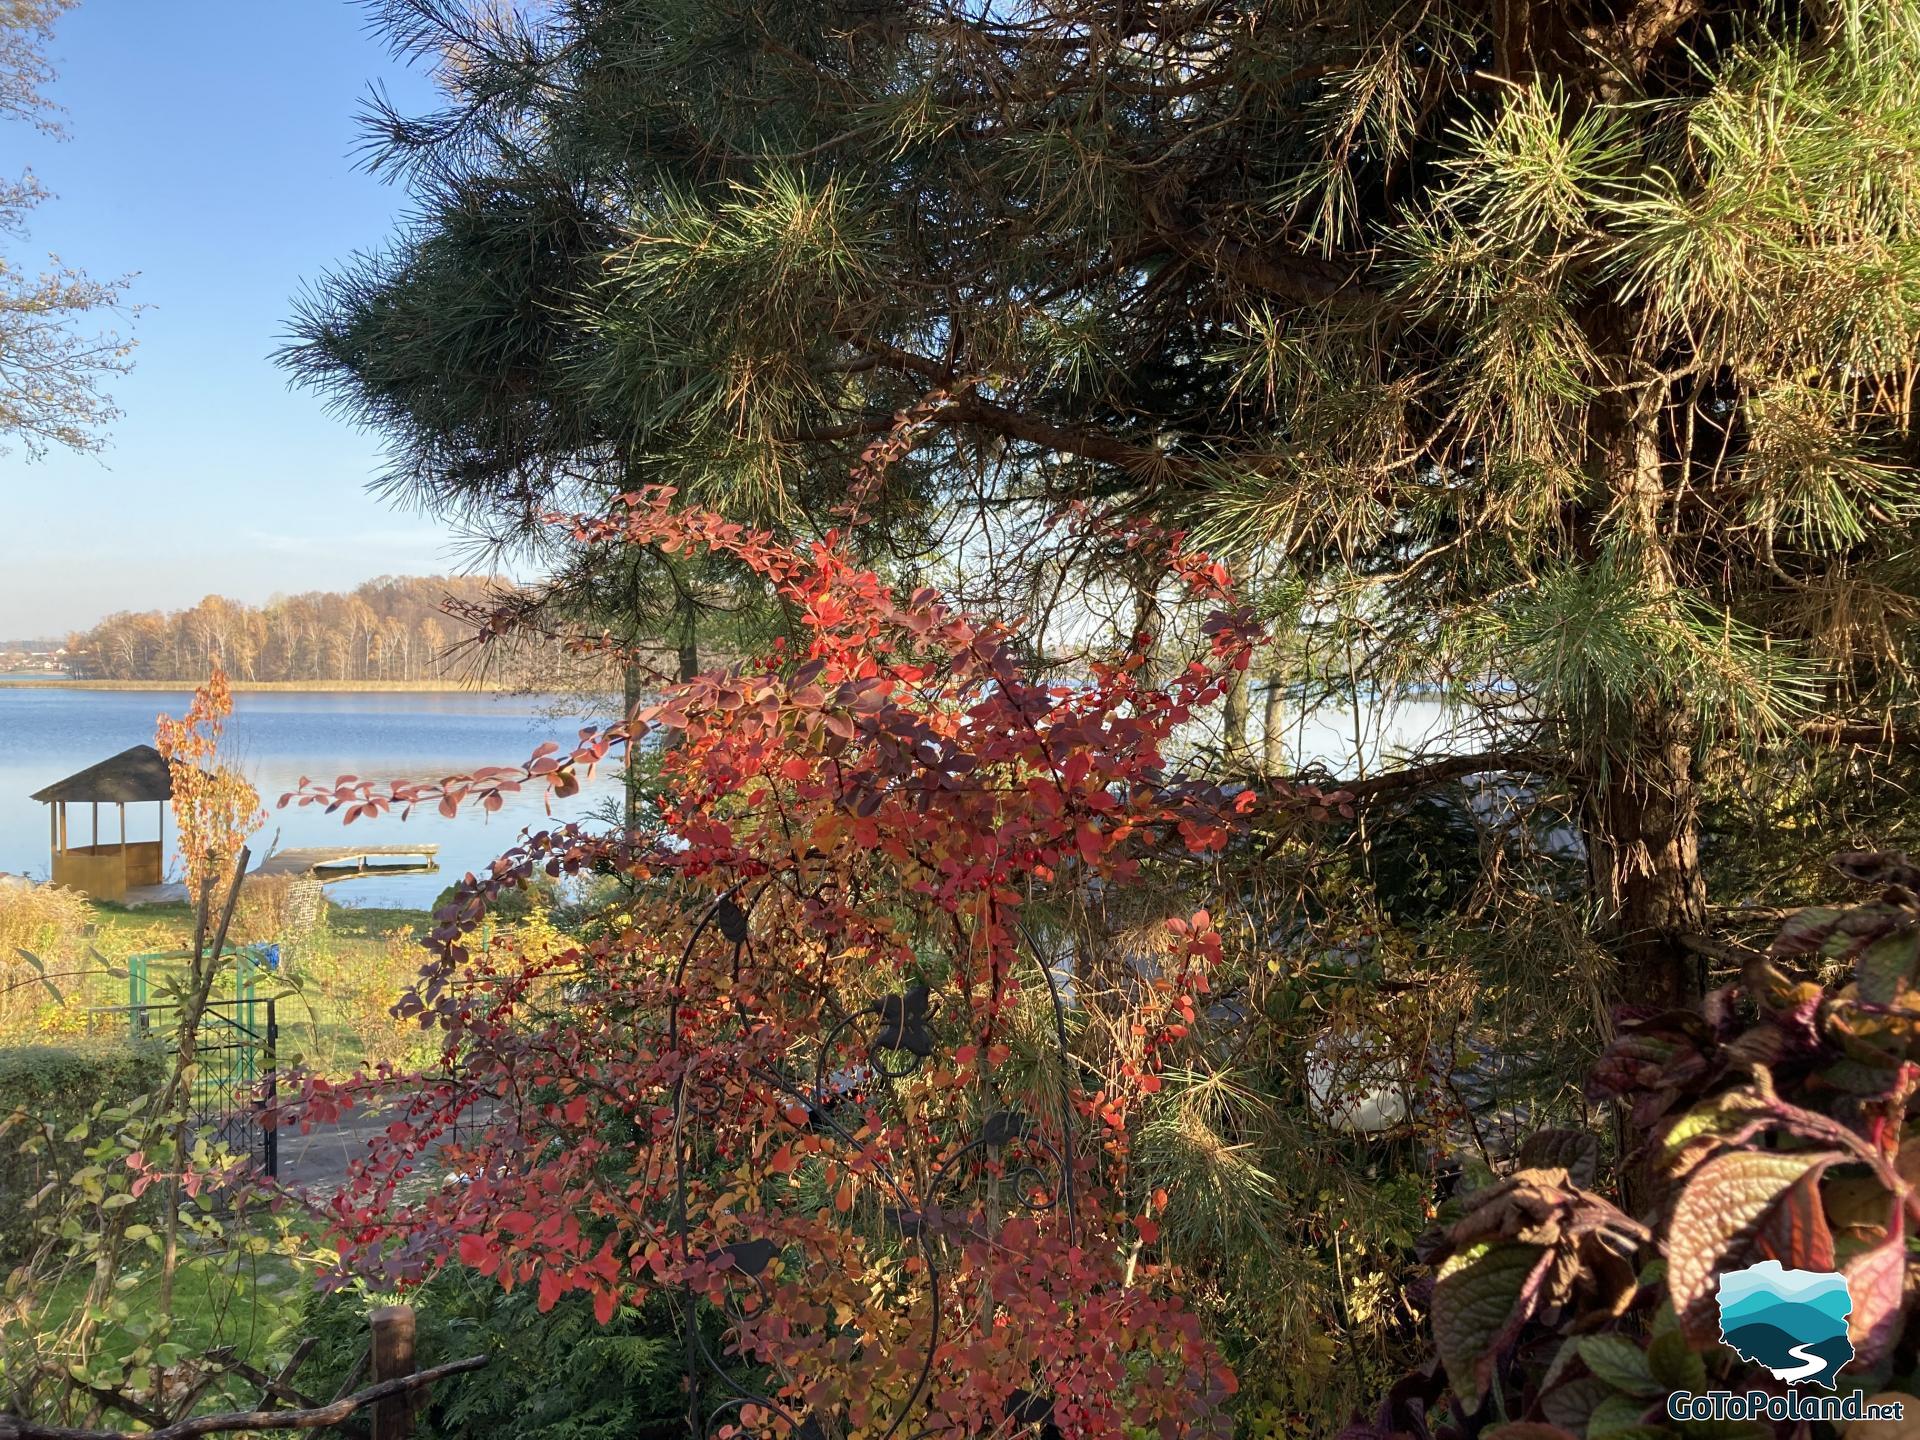 Trees and bushes with colorful leaves, a lake in the background 